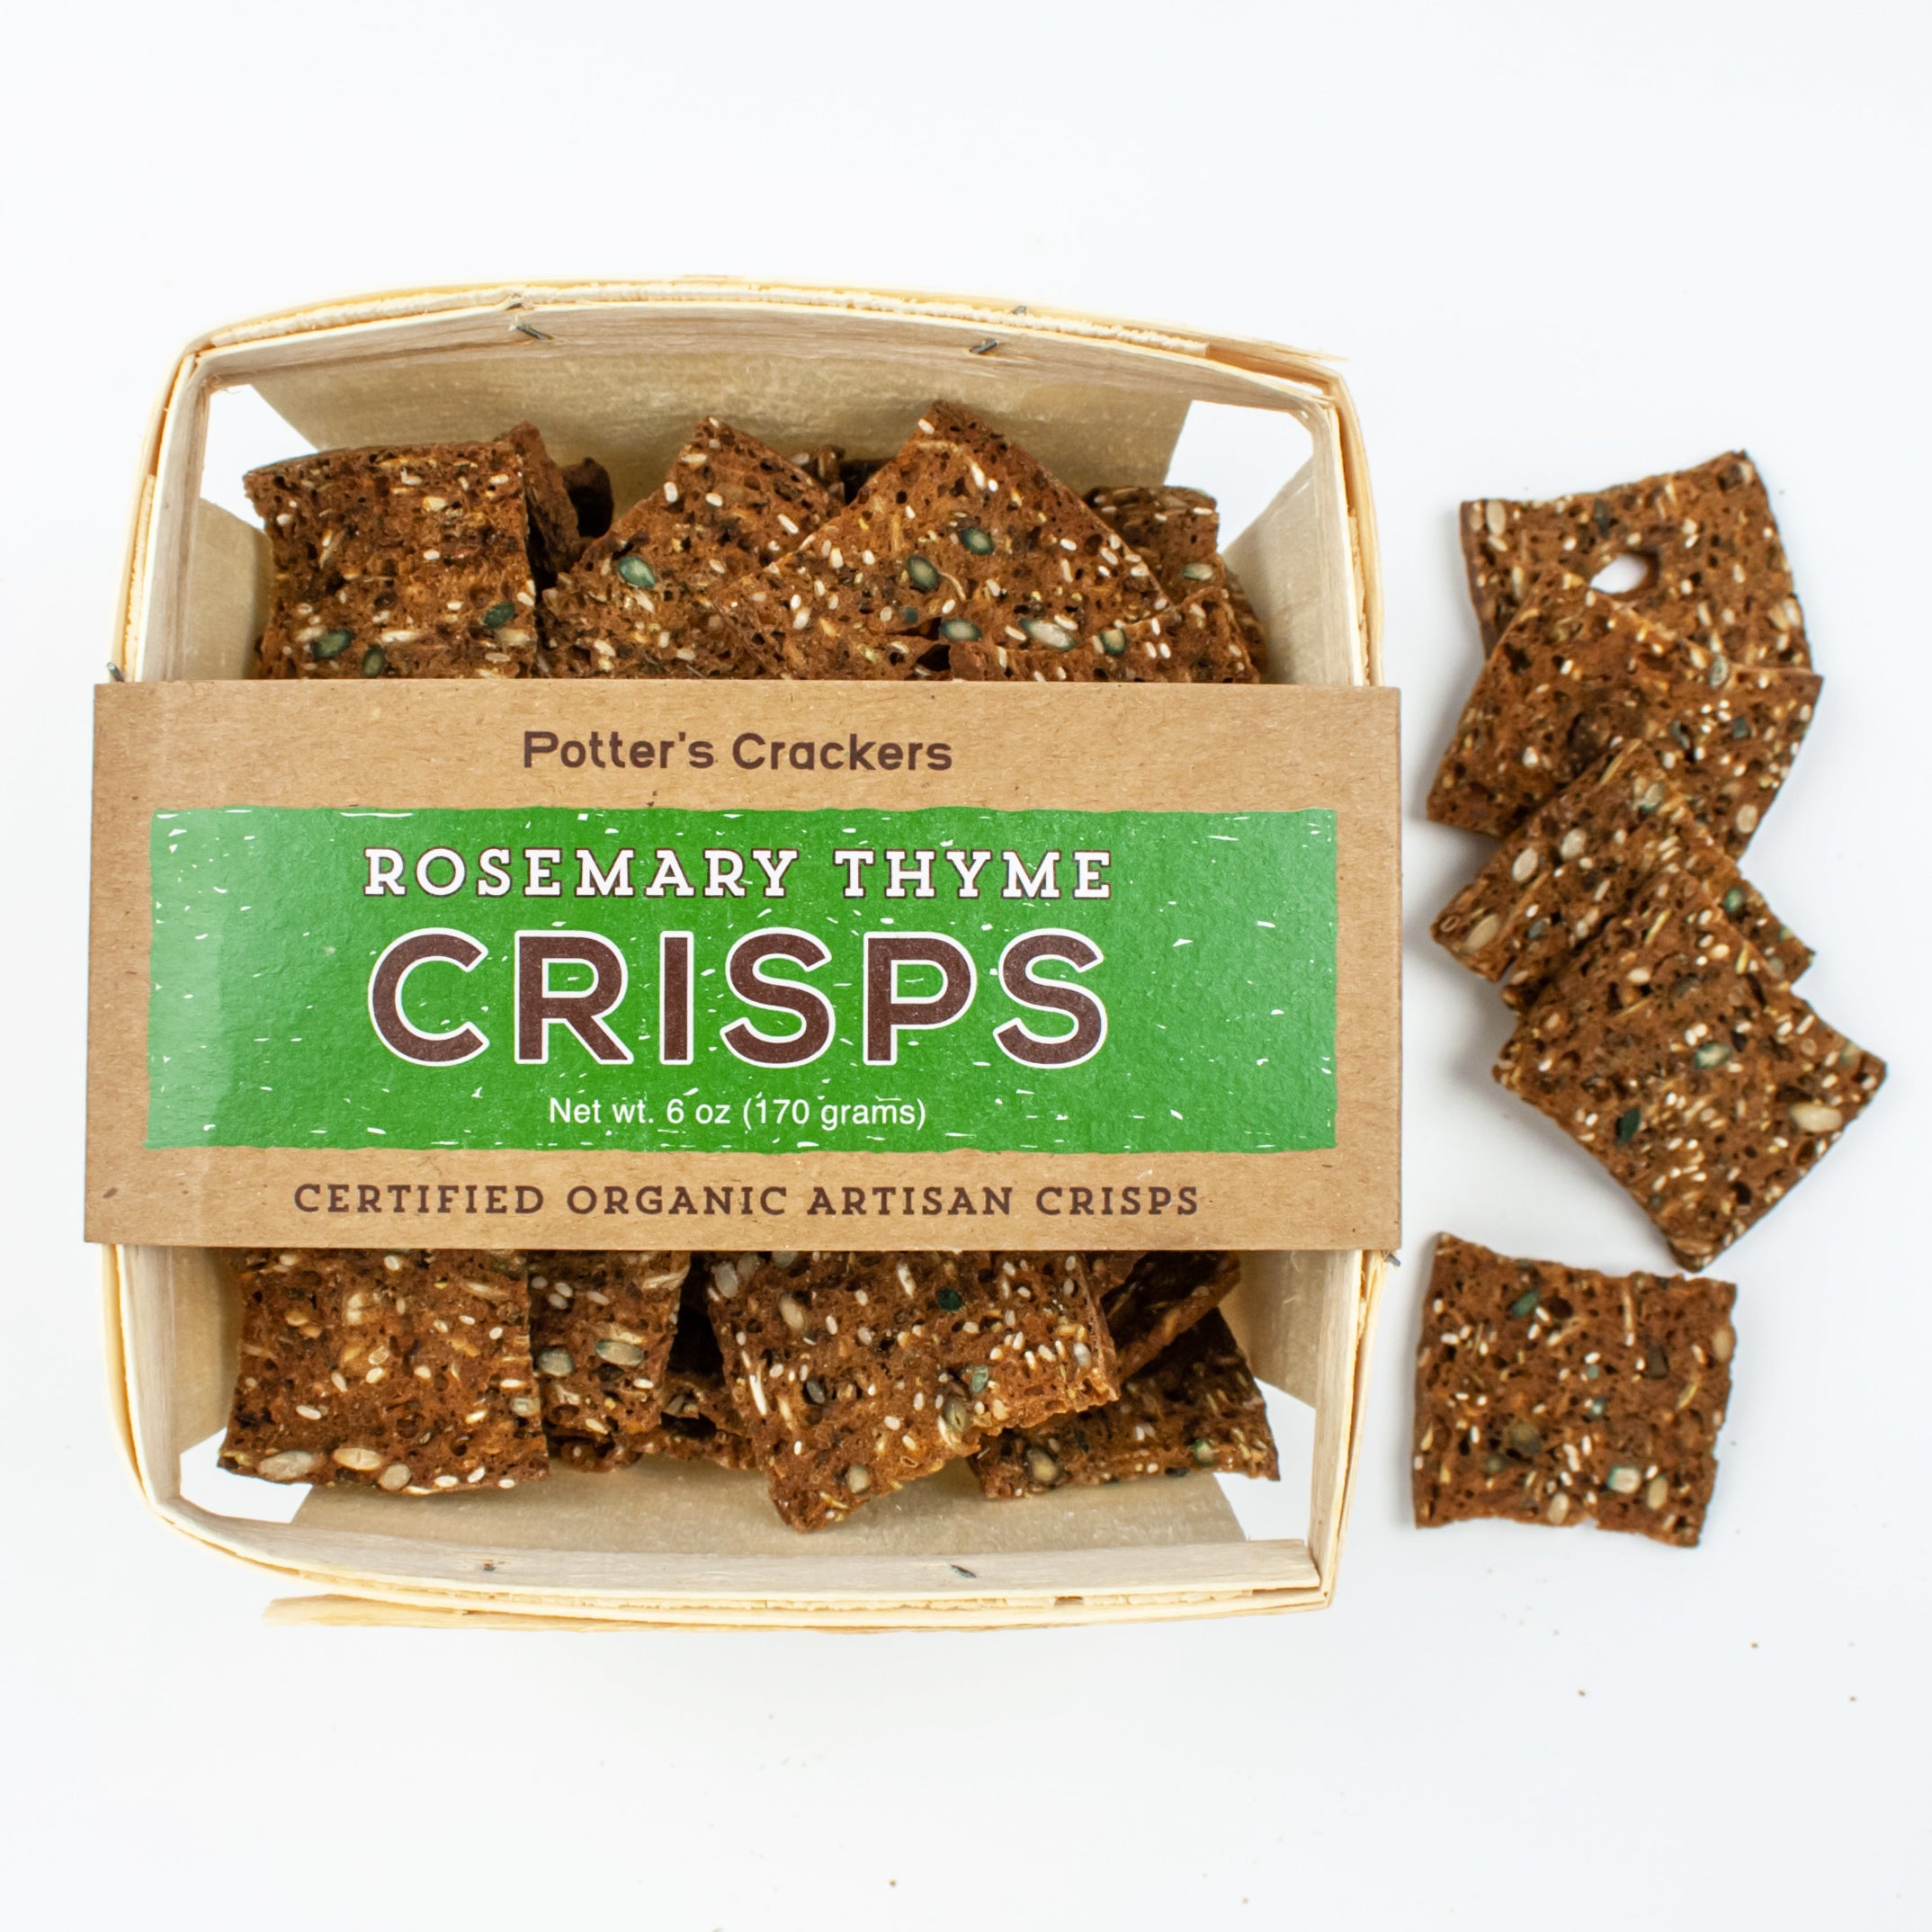 Rosemary Thyme Crisps in Farm Crate